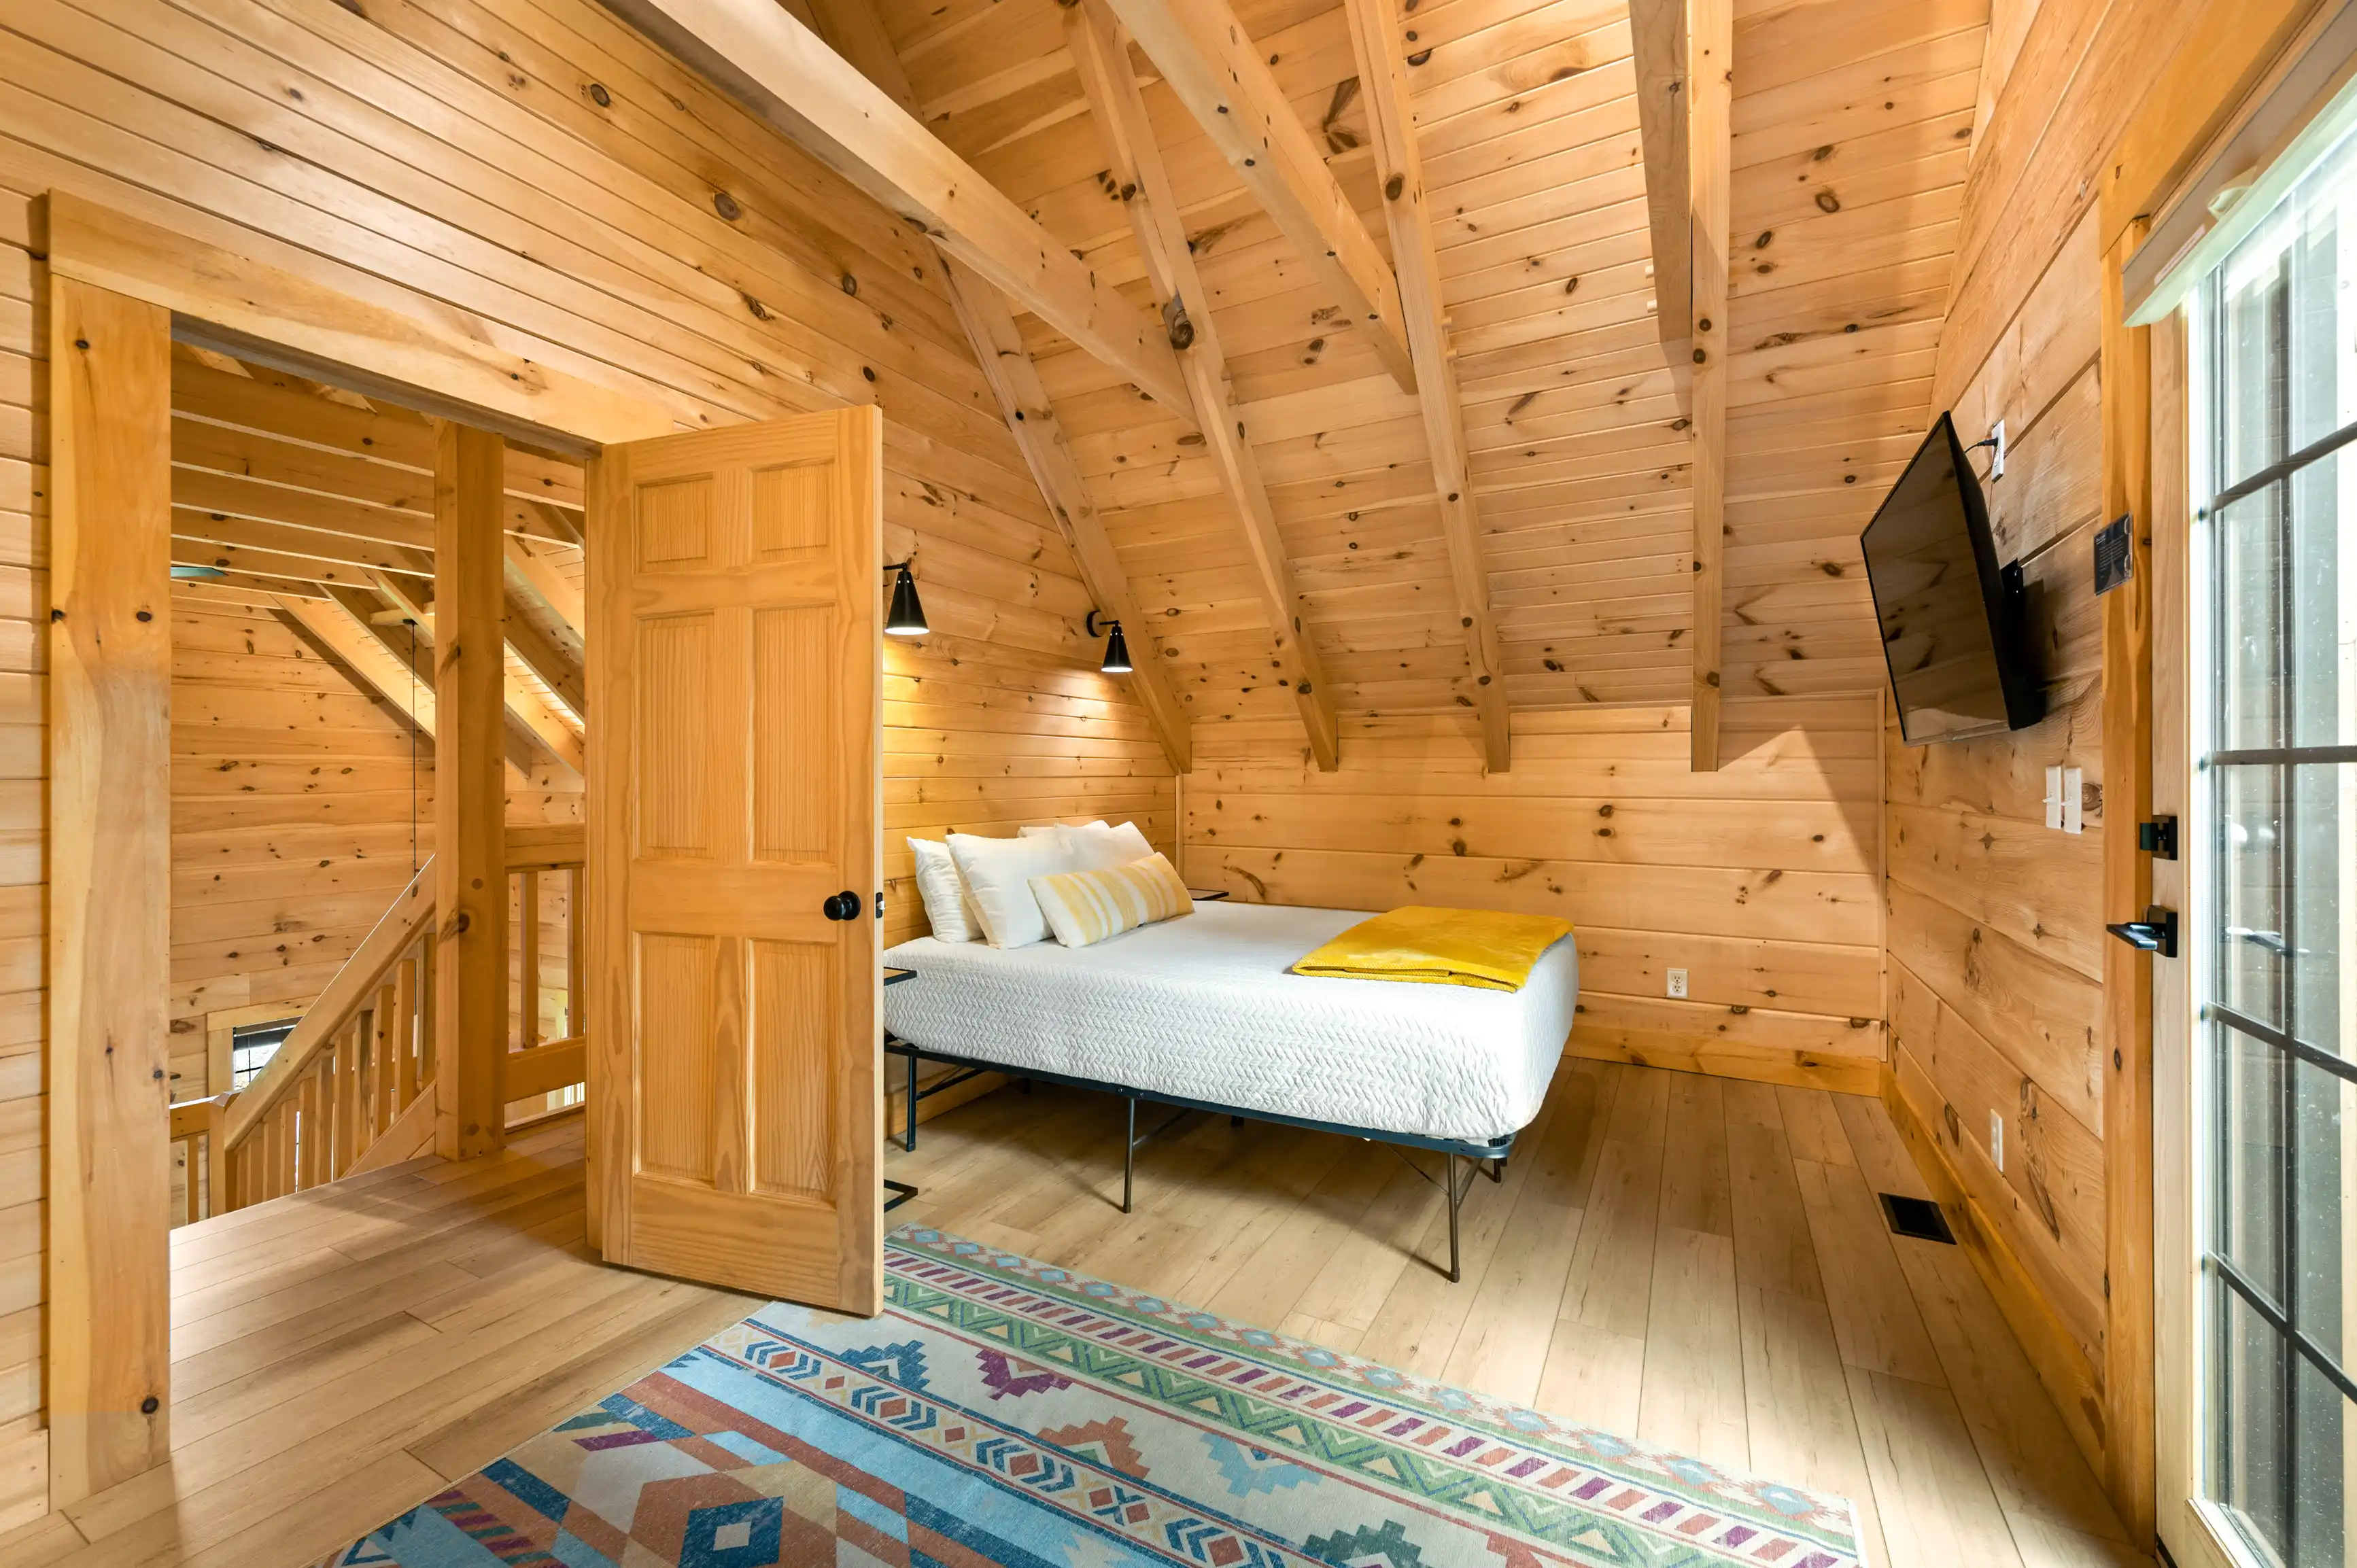 Cozy wooden cabin bedroom with a large bed, colorful rug, vaulted ceiling, and natural light from adjacent windows.